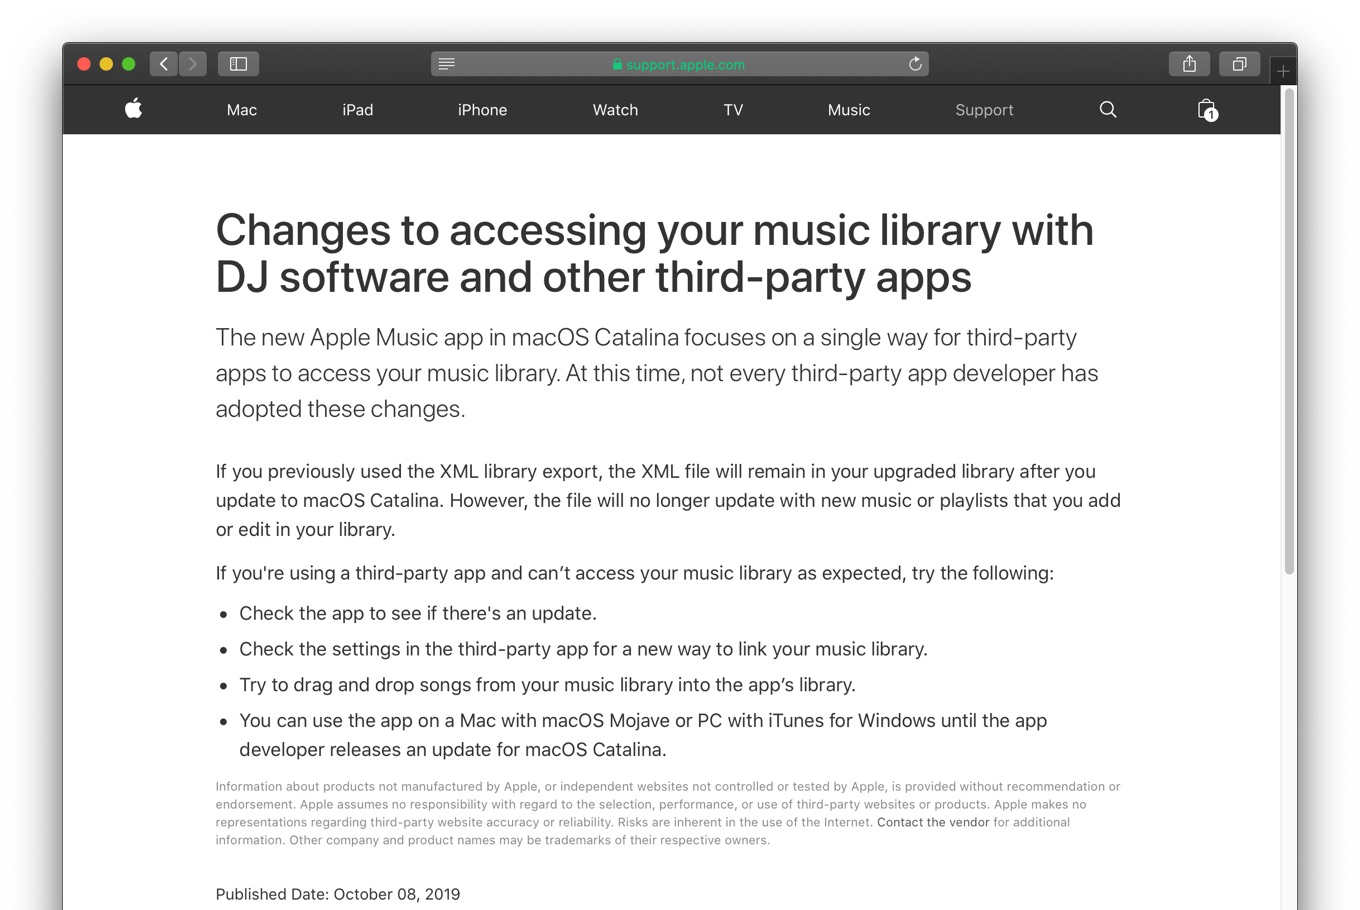 Changes to accessing your music library with DJ software and other third-party apps